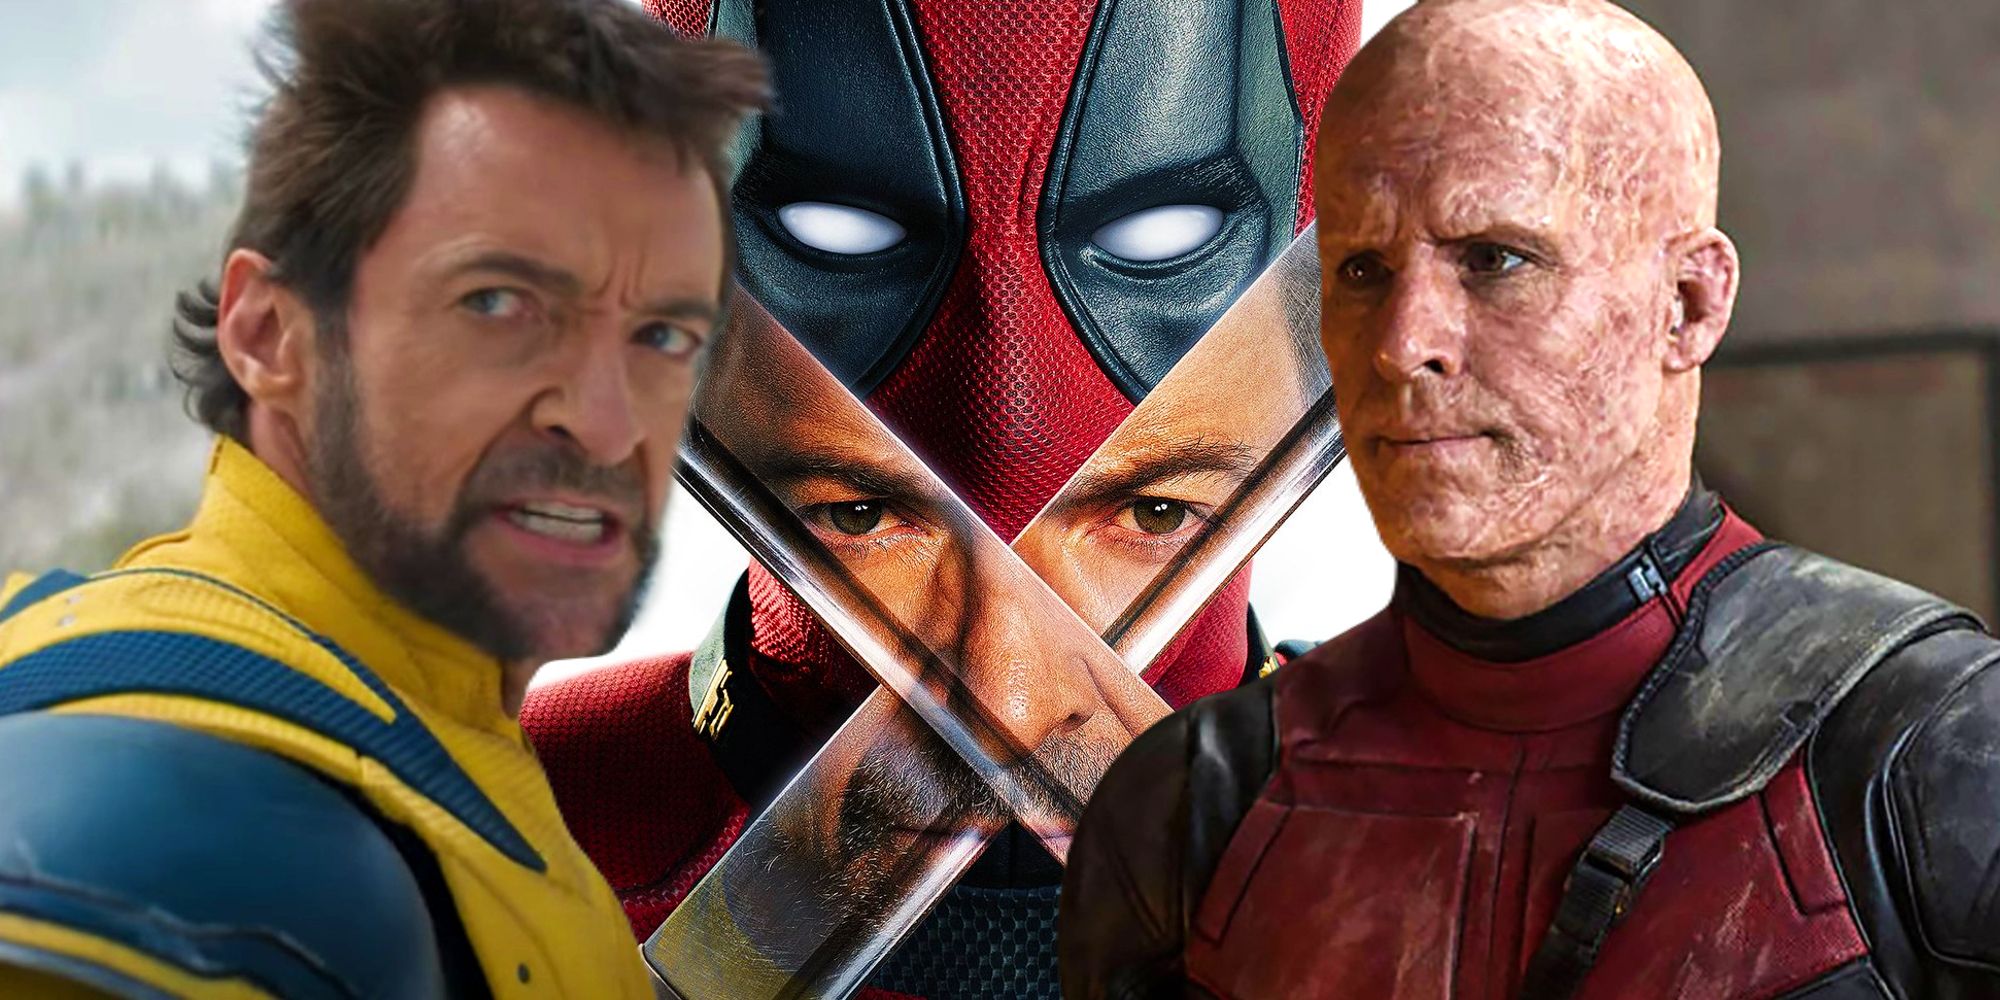 The poster for Deadpool & Wolverine (2024) between a surly Hugh Jackman as Wolverine and Ryan Reynolds as Wade Wilson